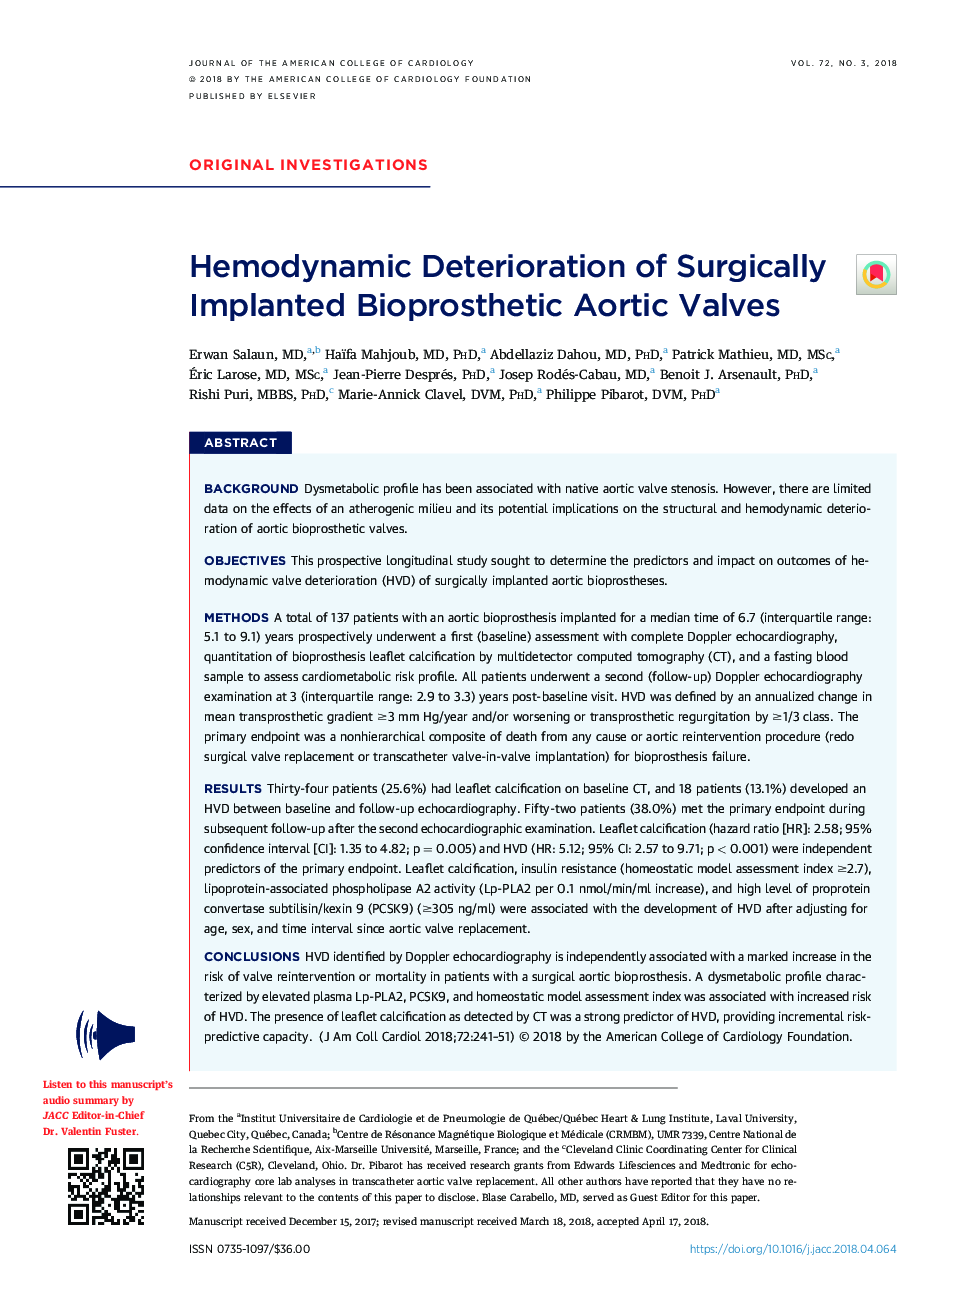 Hemodynamic Deterioration of Surgically Implanted Bioprosthetic Aortic Valves